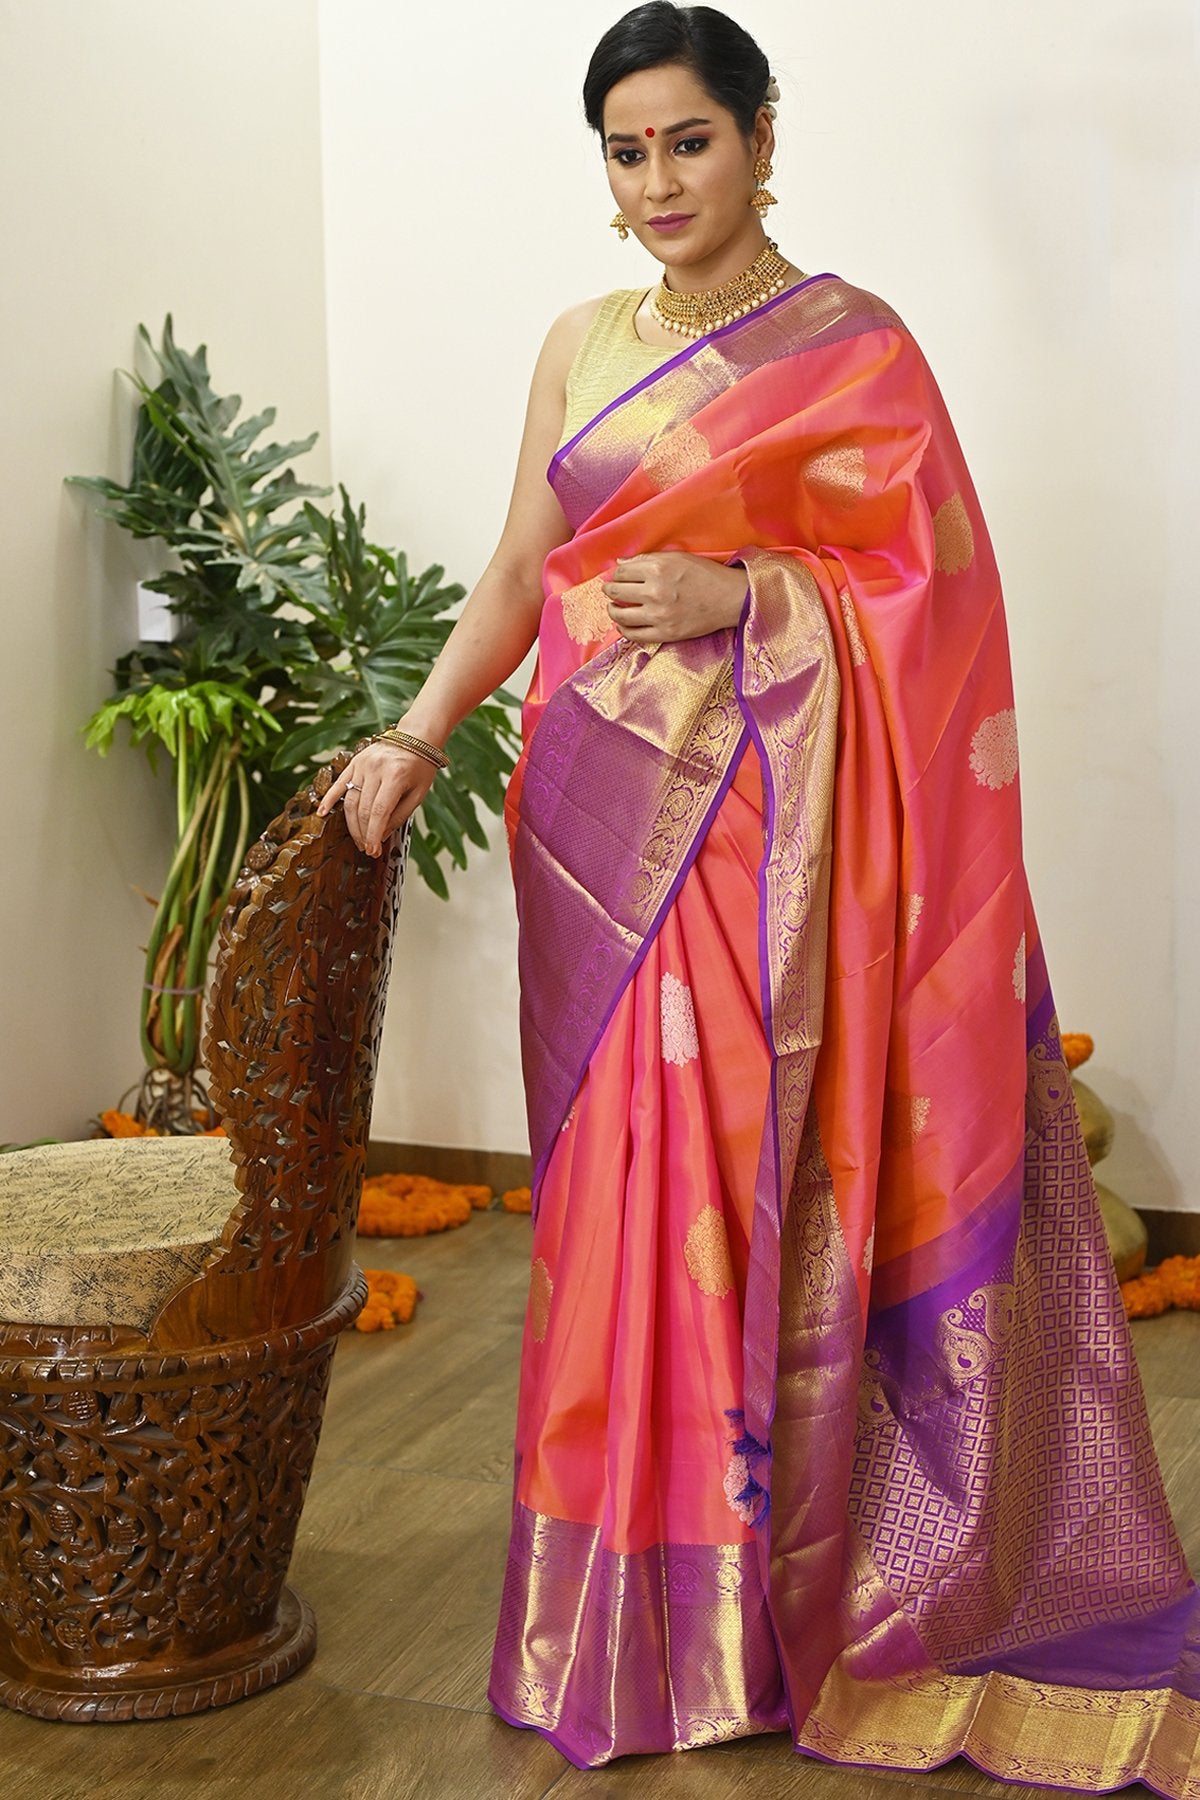 Top 10 Ways to Mix and Match Plain Sarees with Blouse - Loomfolks